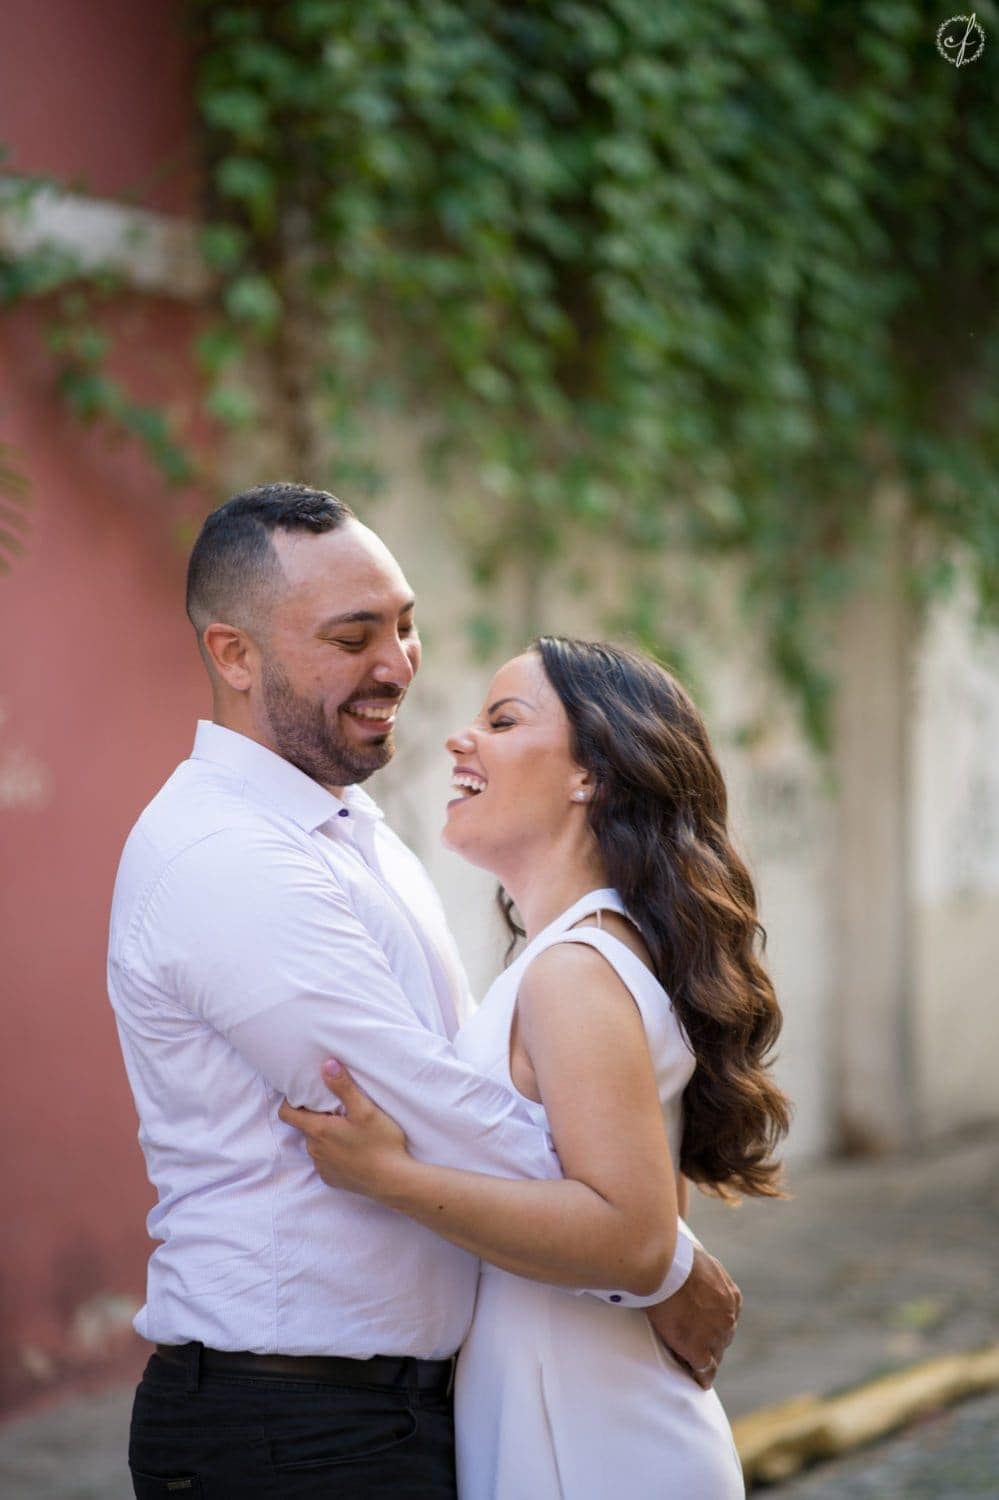 Beautiful engagement portrait session in colorful Old San Juan and El Morro by Puerto Rico wedding photographer Camille Fontanez